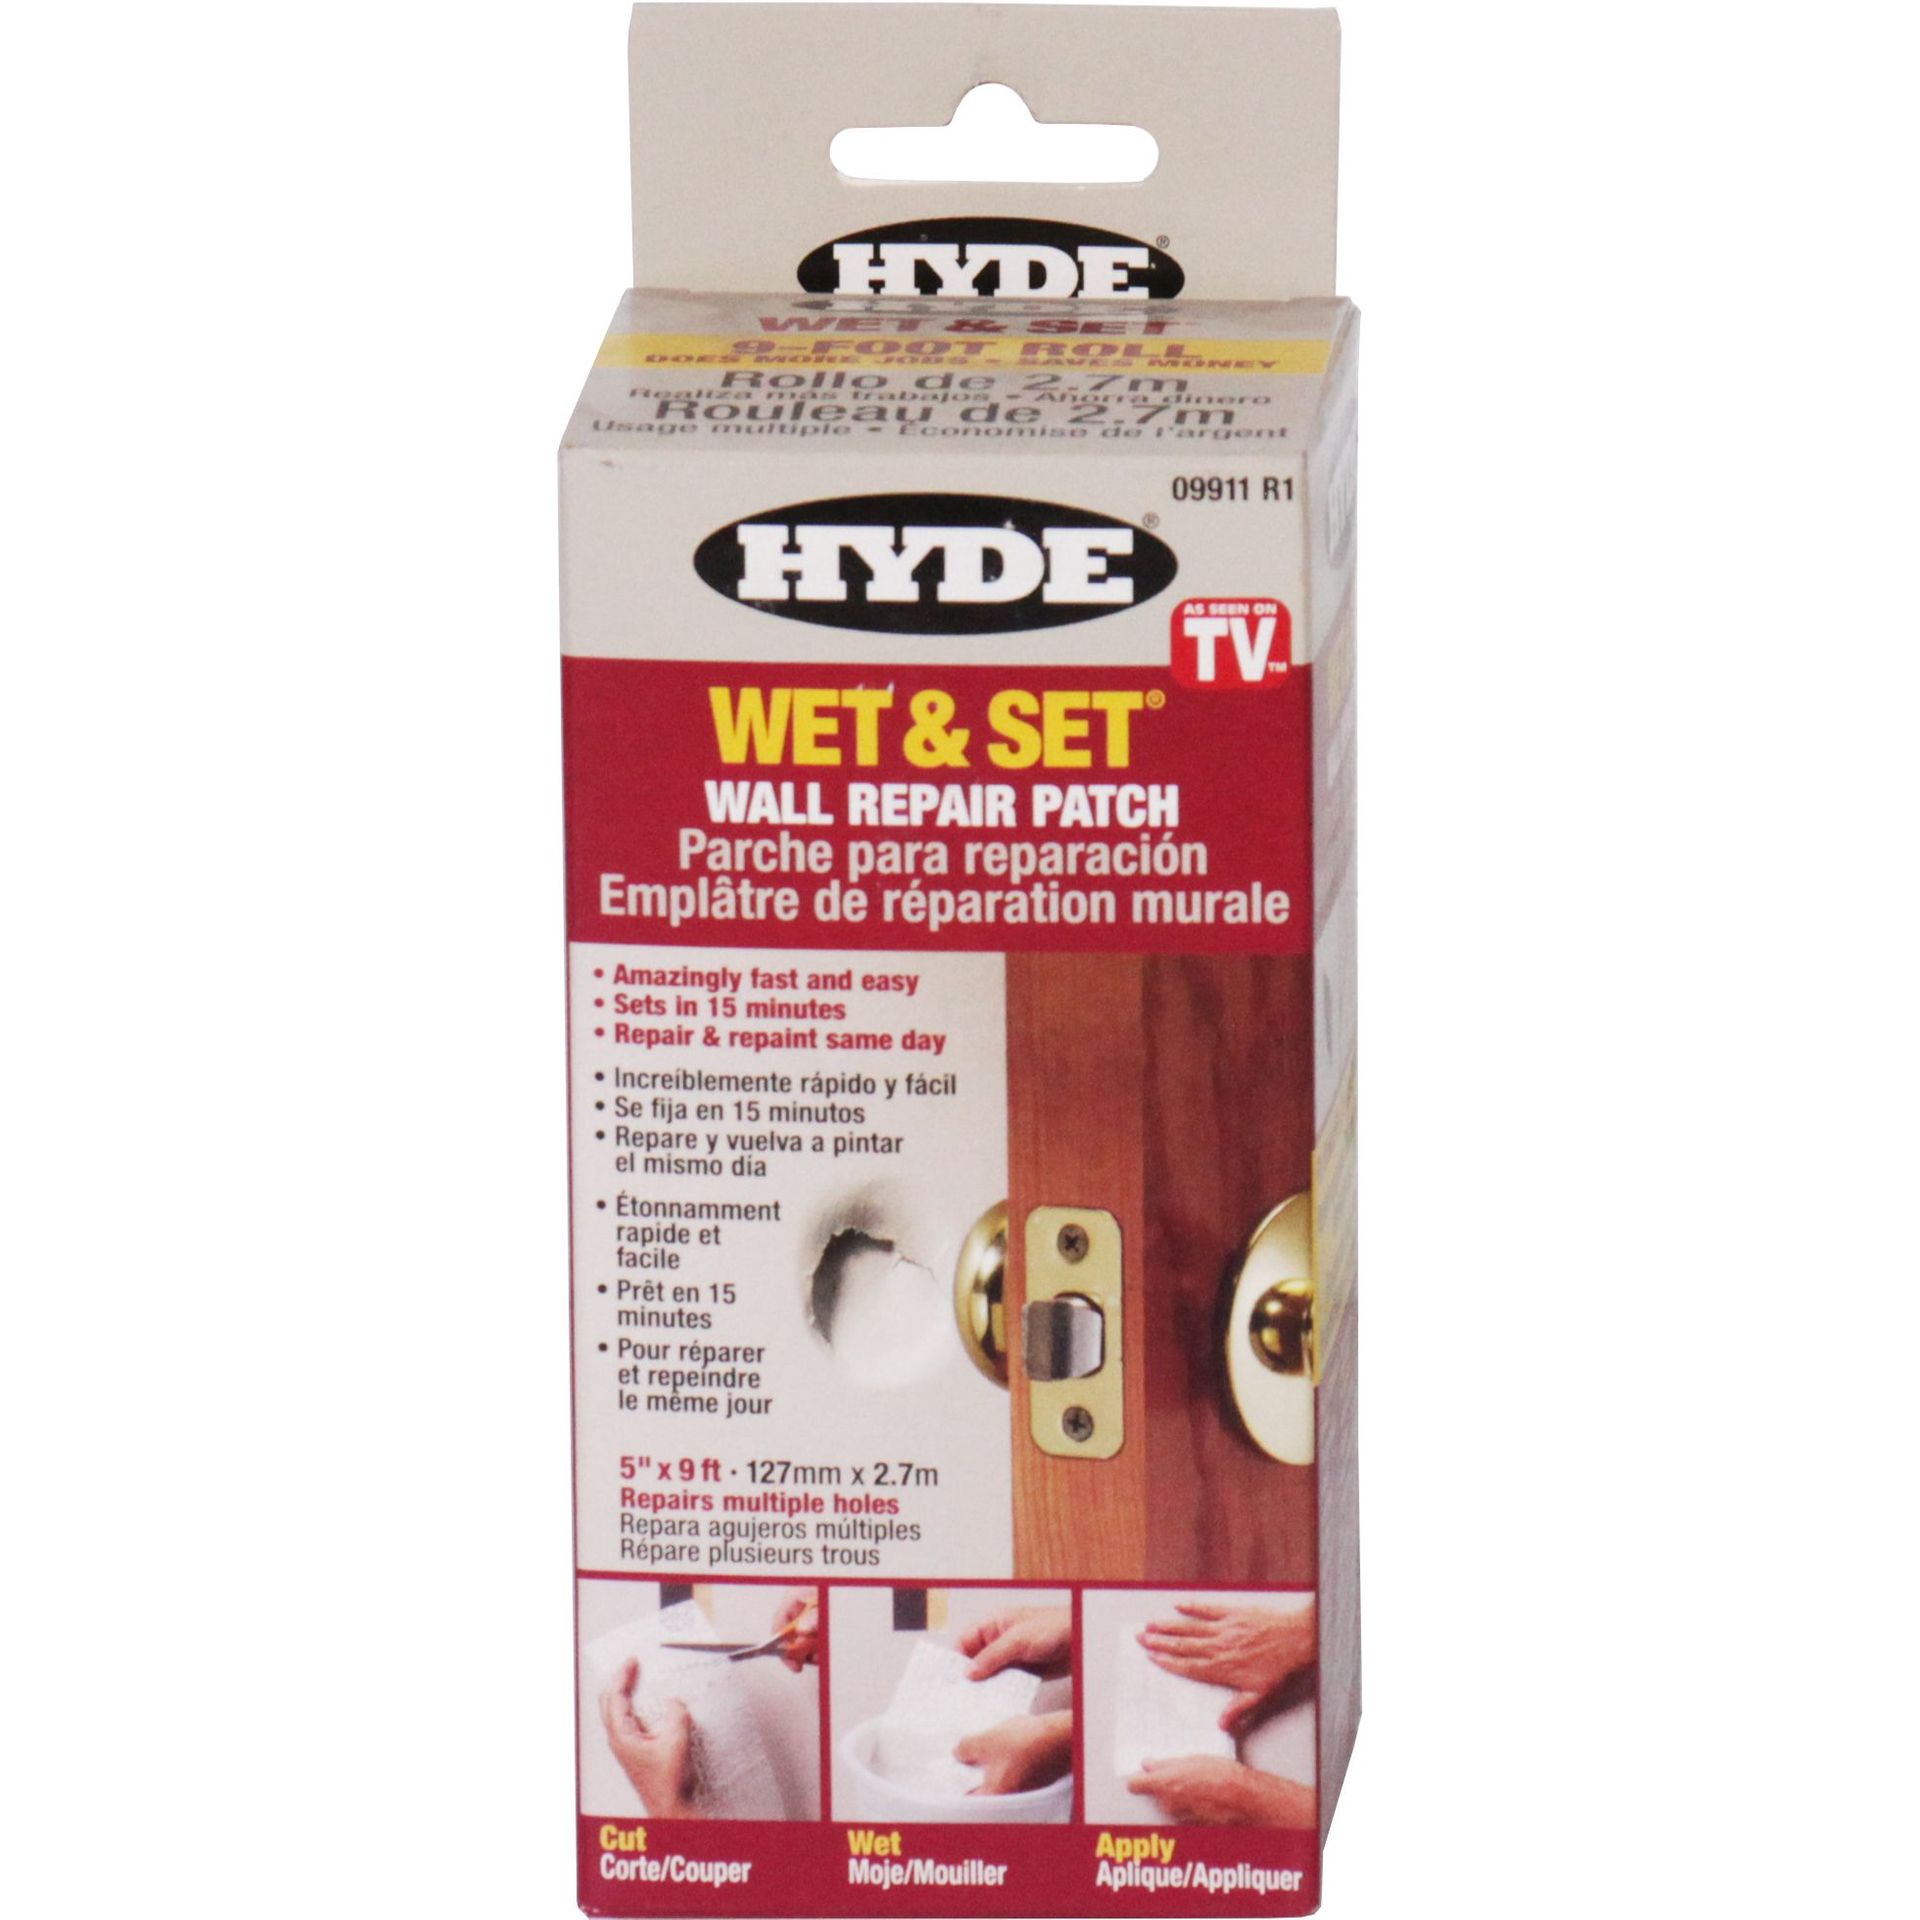 HYDE Wet & Set 30-Minute Repair Patch, Contractor Roll (09911